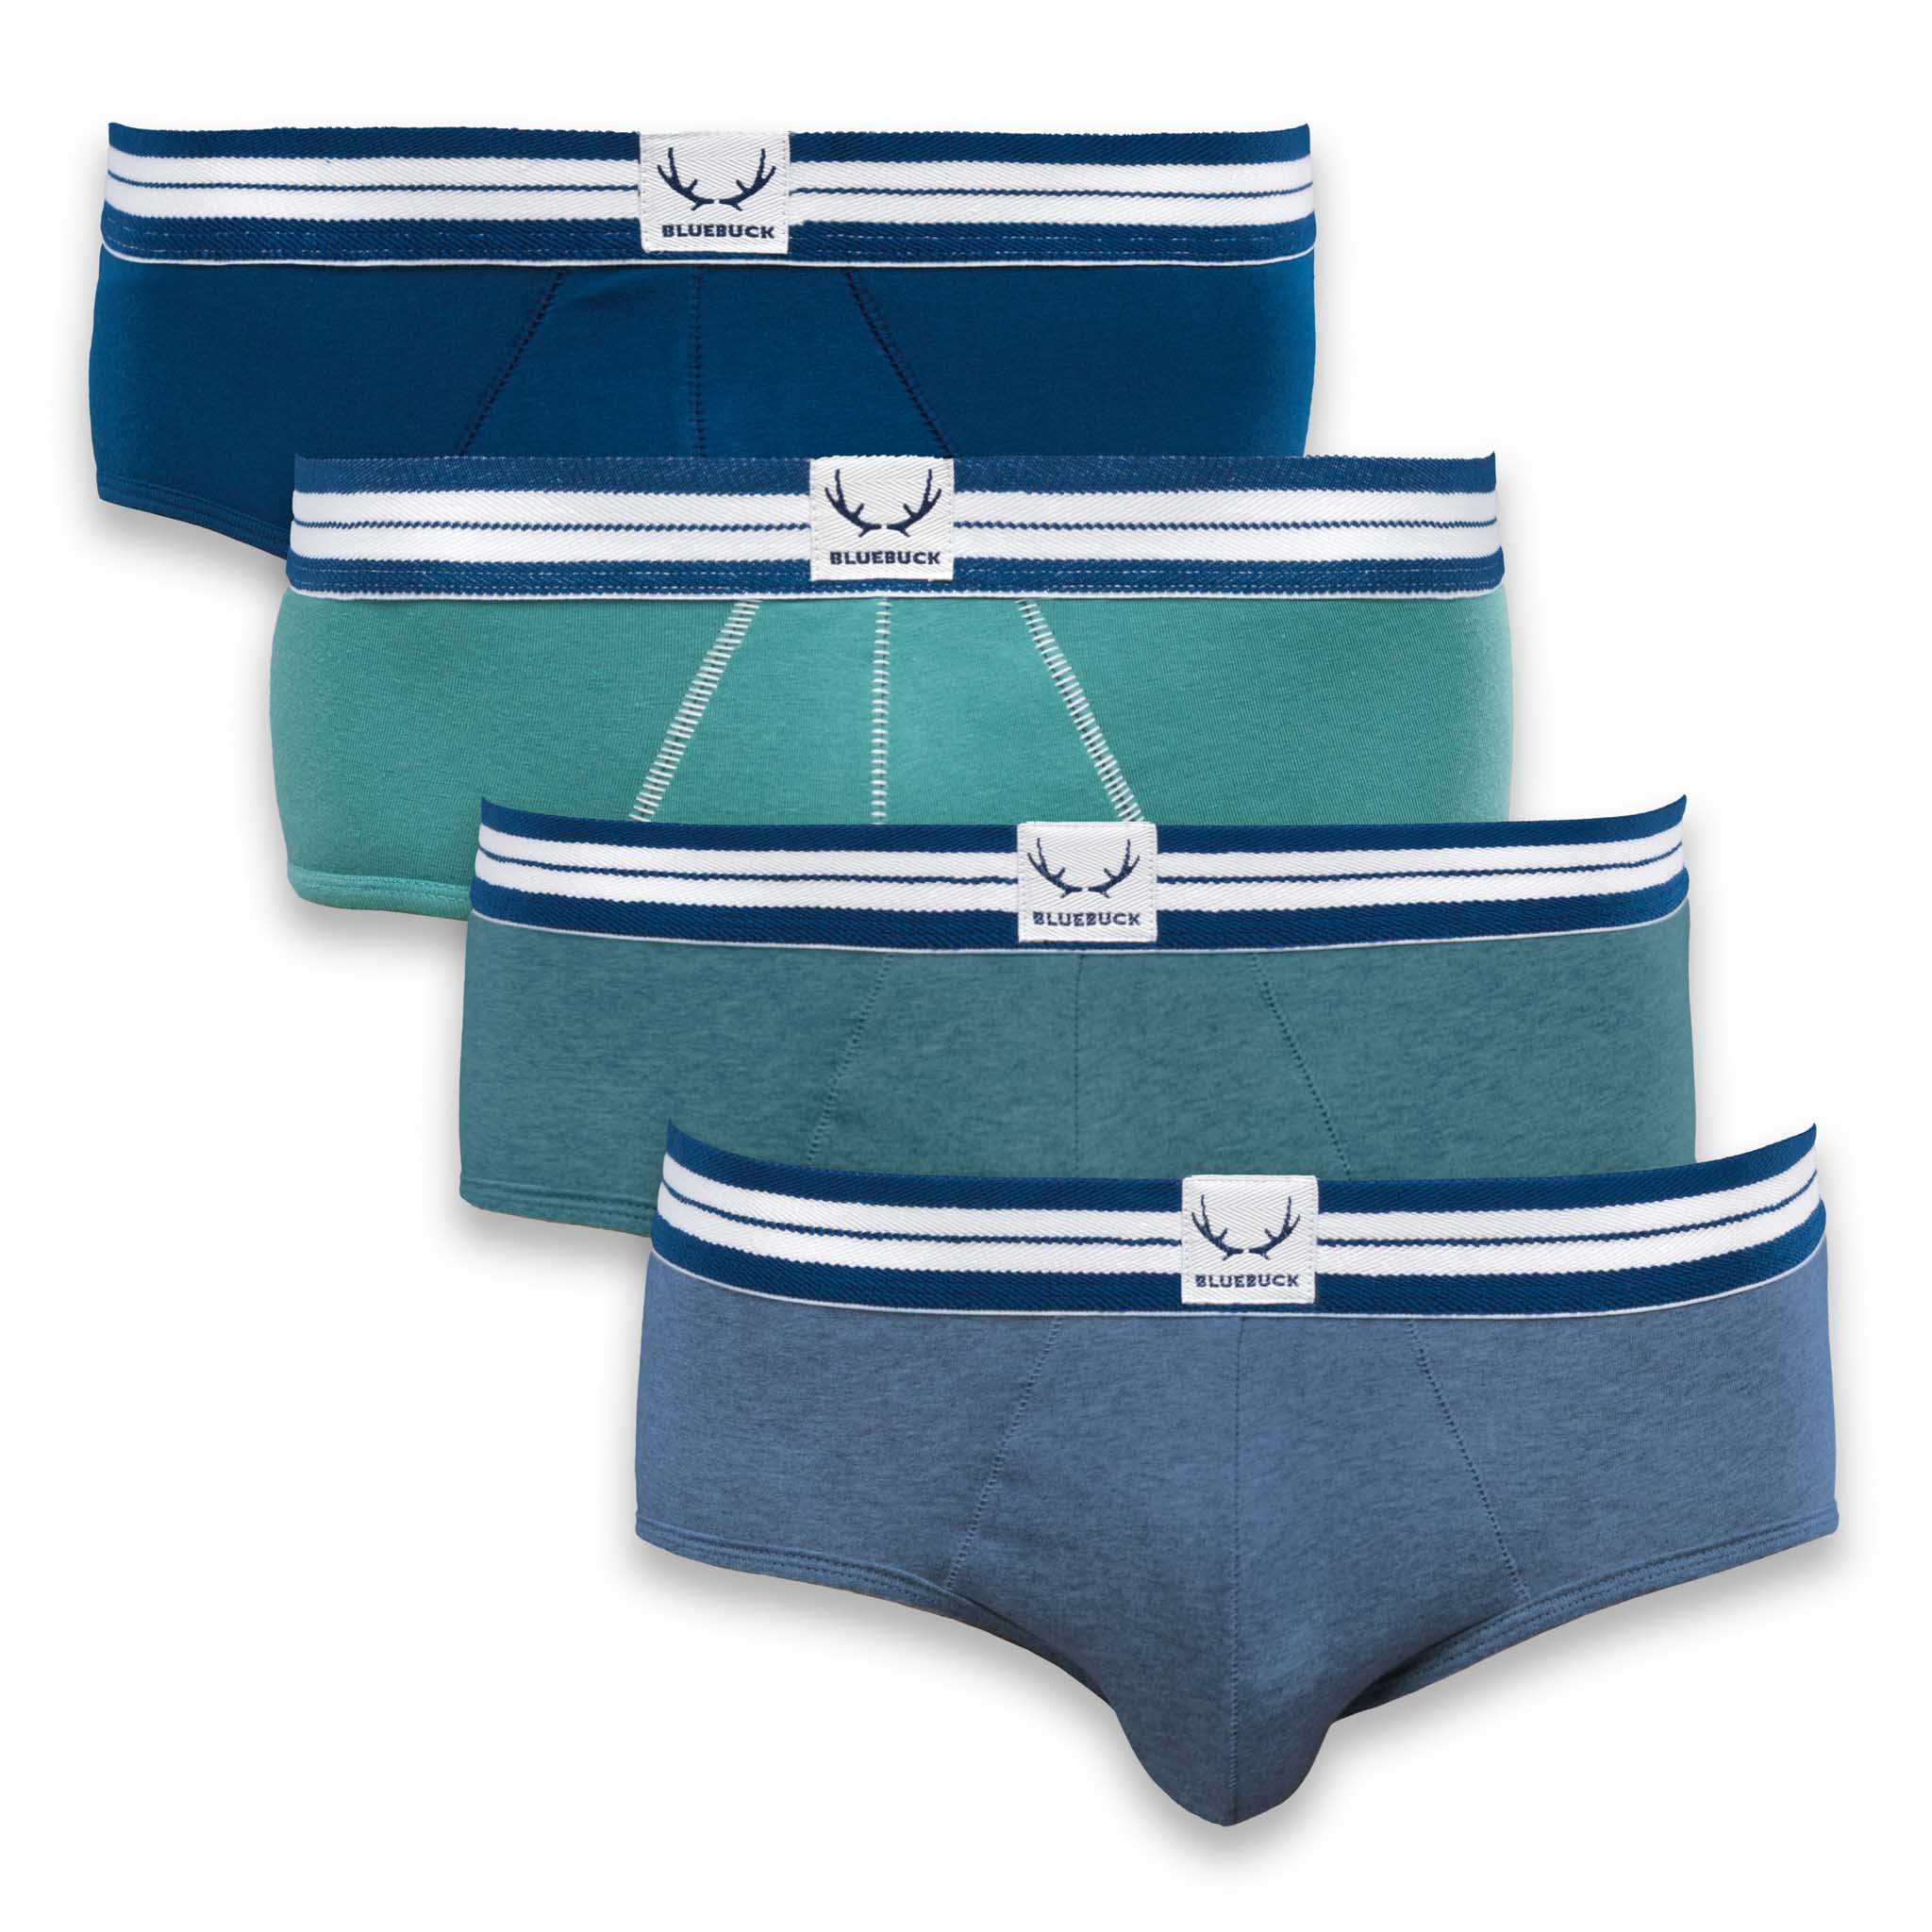 Colorful, classic underwear pack of 4 made from organic cotton from Bluebuck